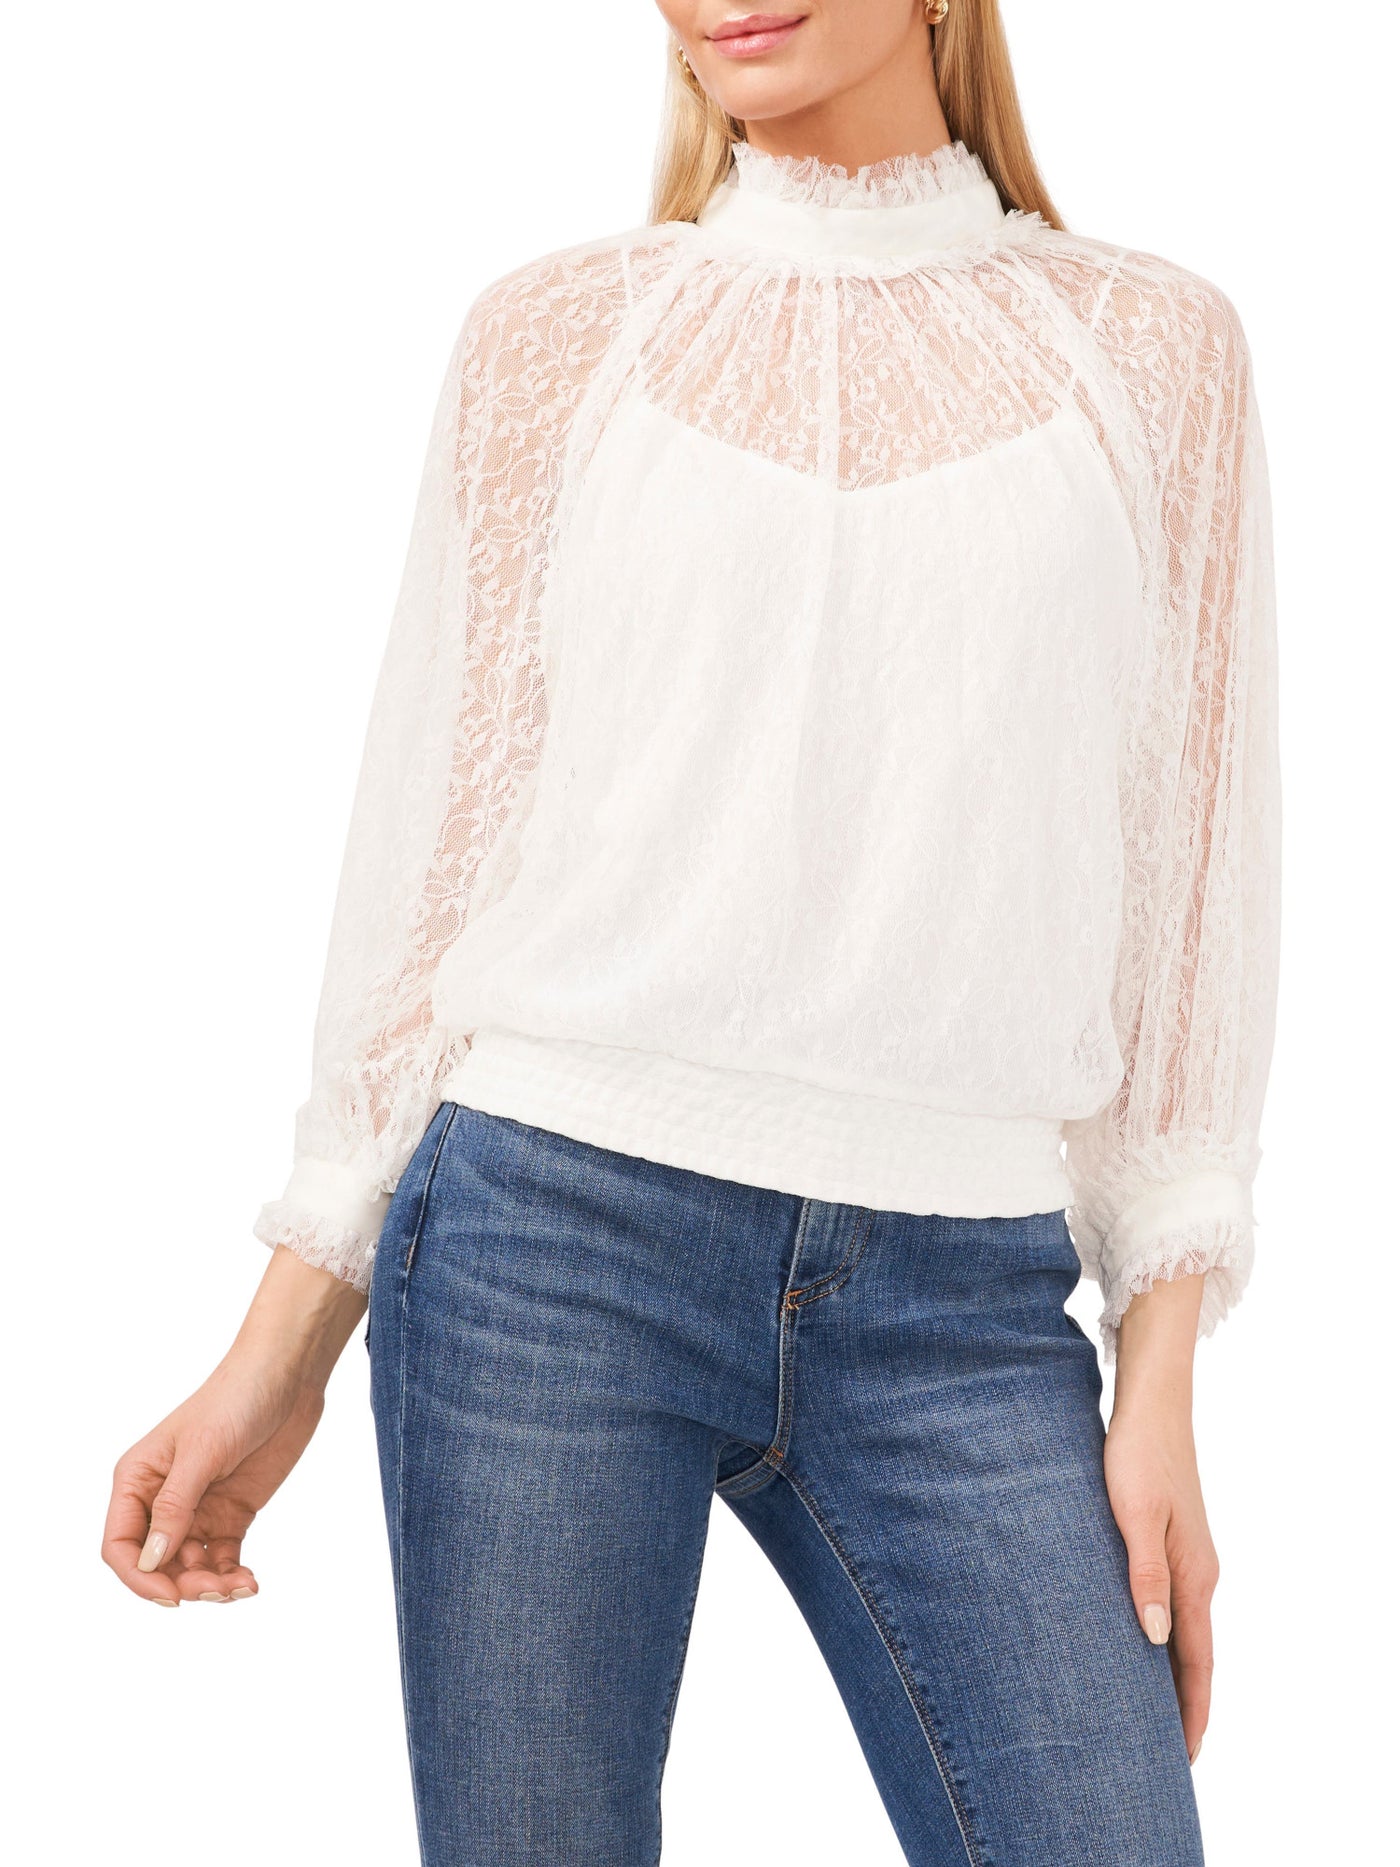 VINCE CAMUTO Womens Ivory Lace Smocked Keyhole Back Lined Long Sleeve Mock Neck Top XL